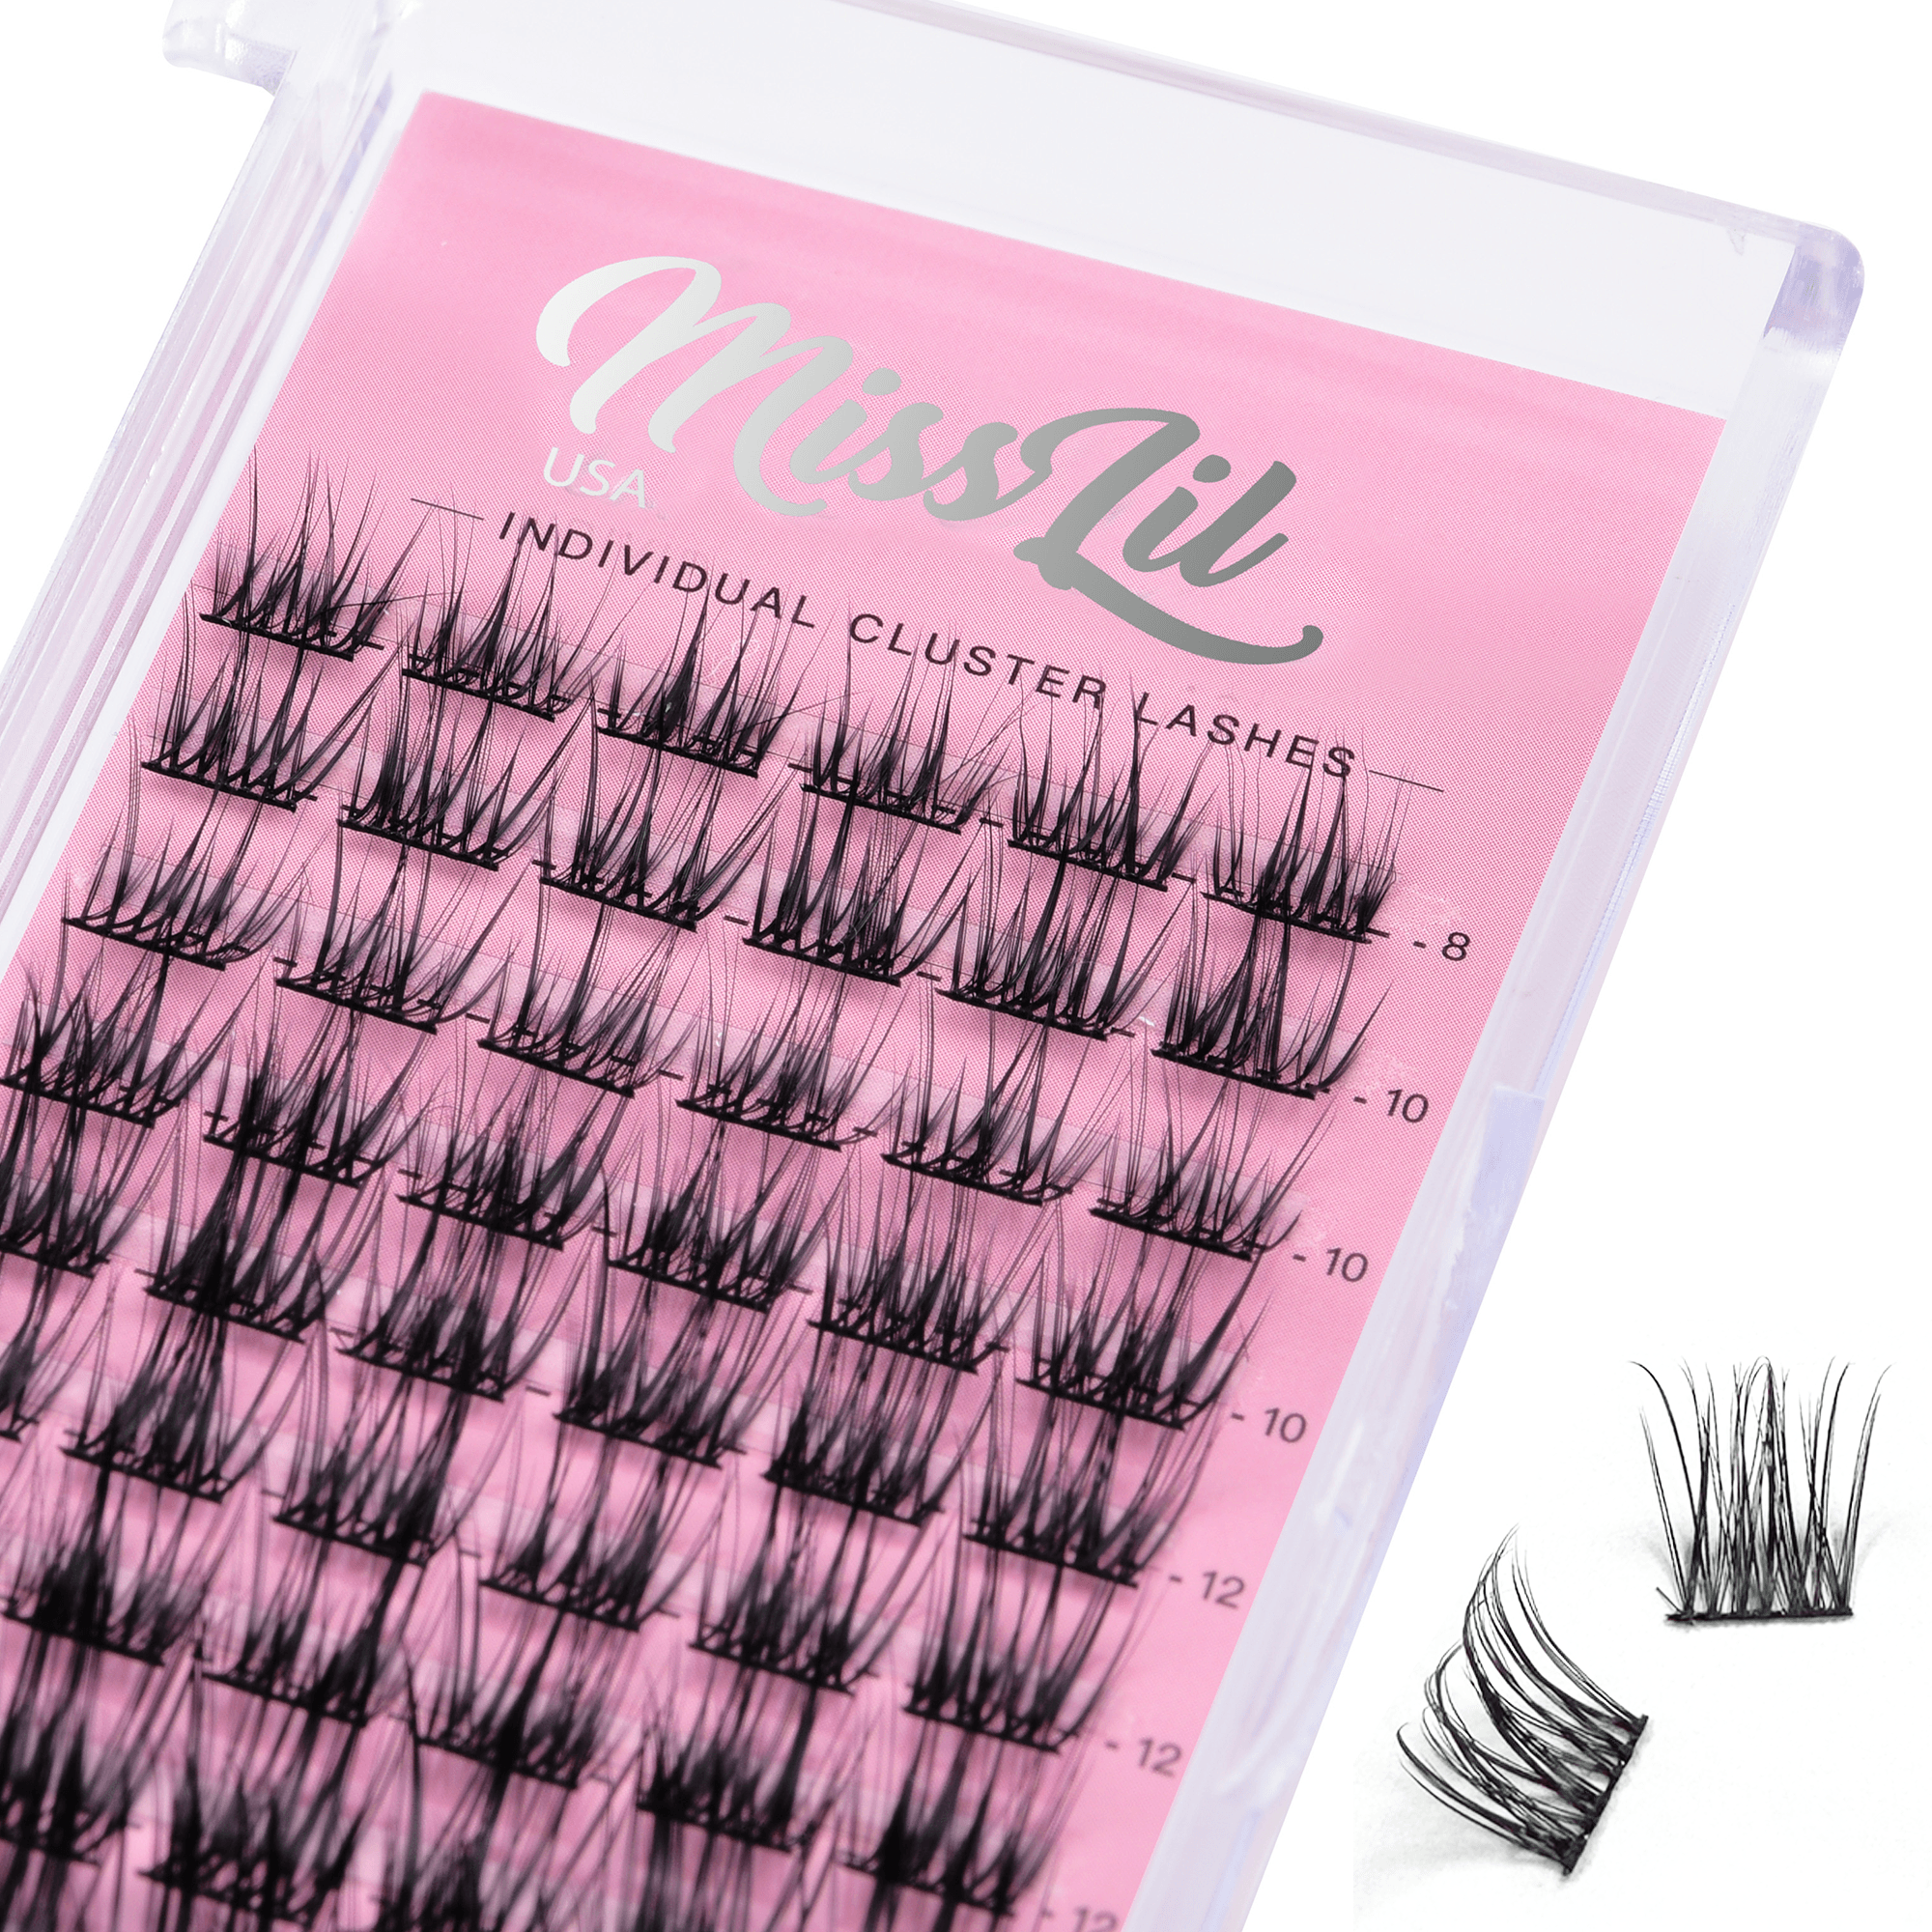 DIY Cluster Lashes AD-27 Small Mixed Tray - Miss Lil USA